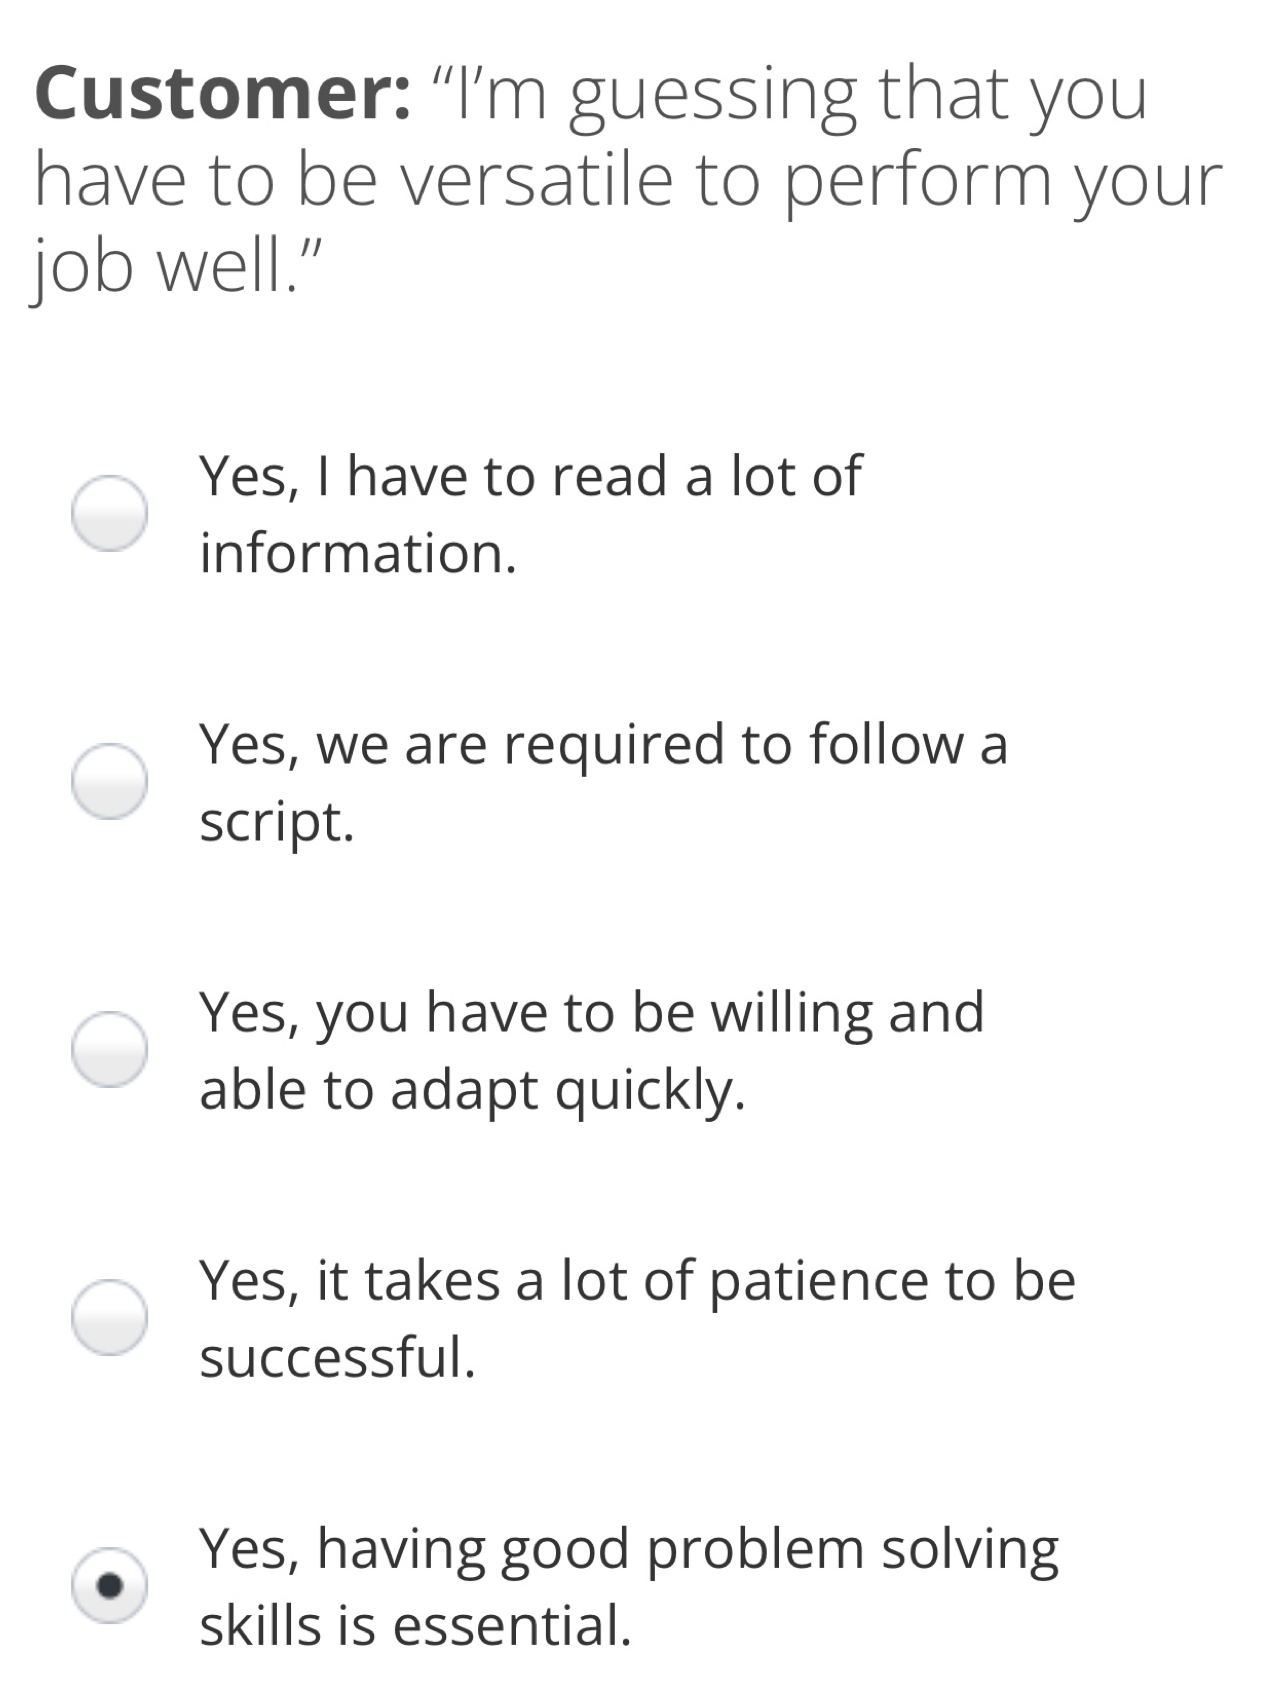 Customer: “I’m guessing that you have to be versatile to perform your job well.” Yes, I have to read a lot of information. Yes, we are required to follow a script. Yes, you have to be willing and able to adapt quickly. Yes, it takes a lot of patience to be successful. Yes, having good problem solving skills is essential.